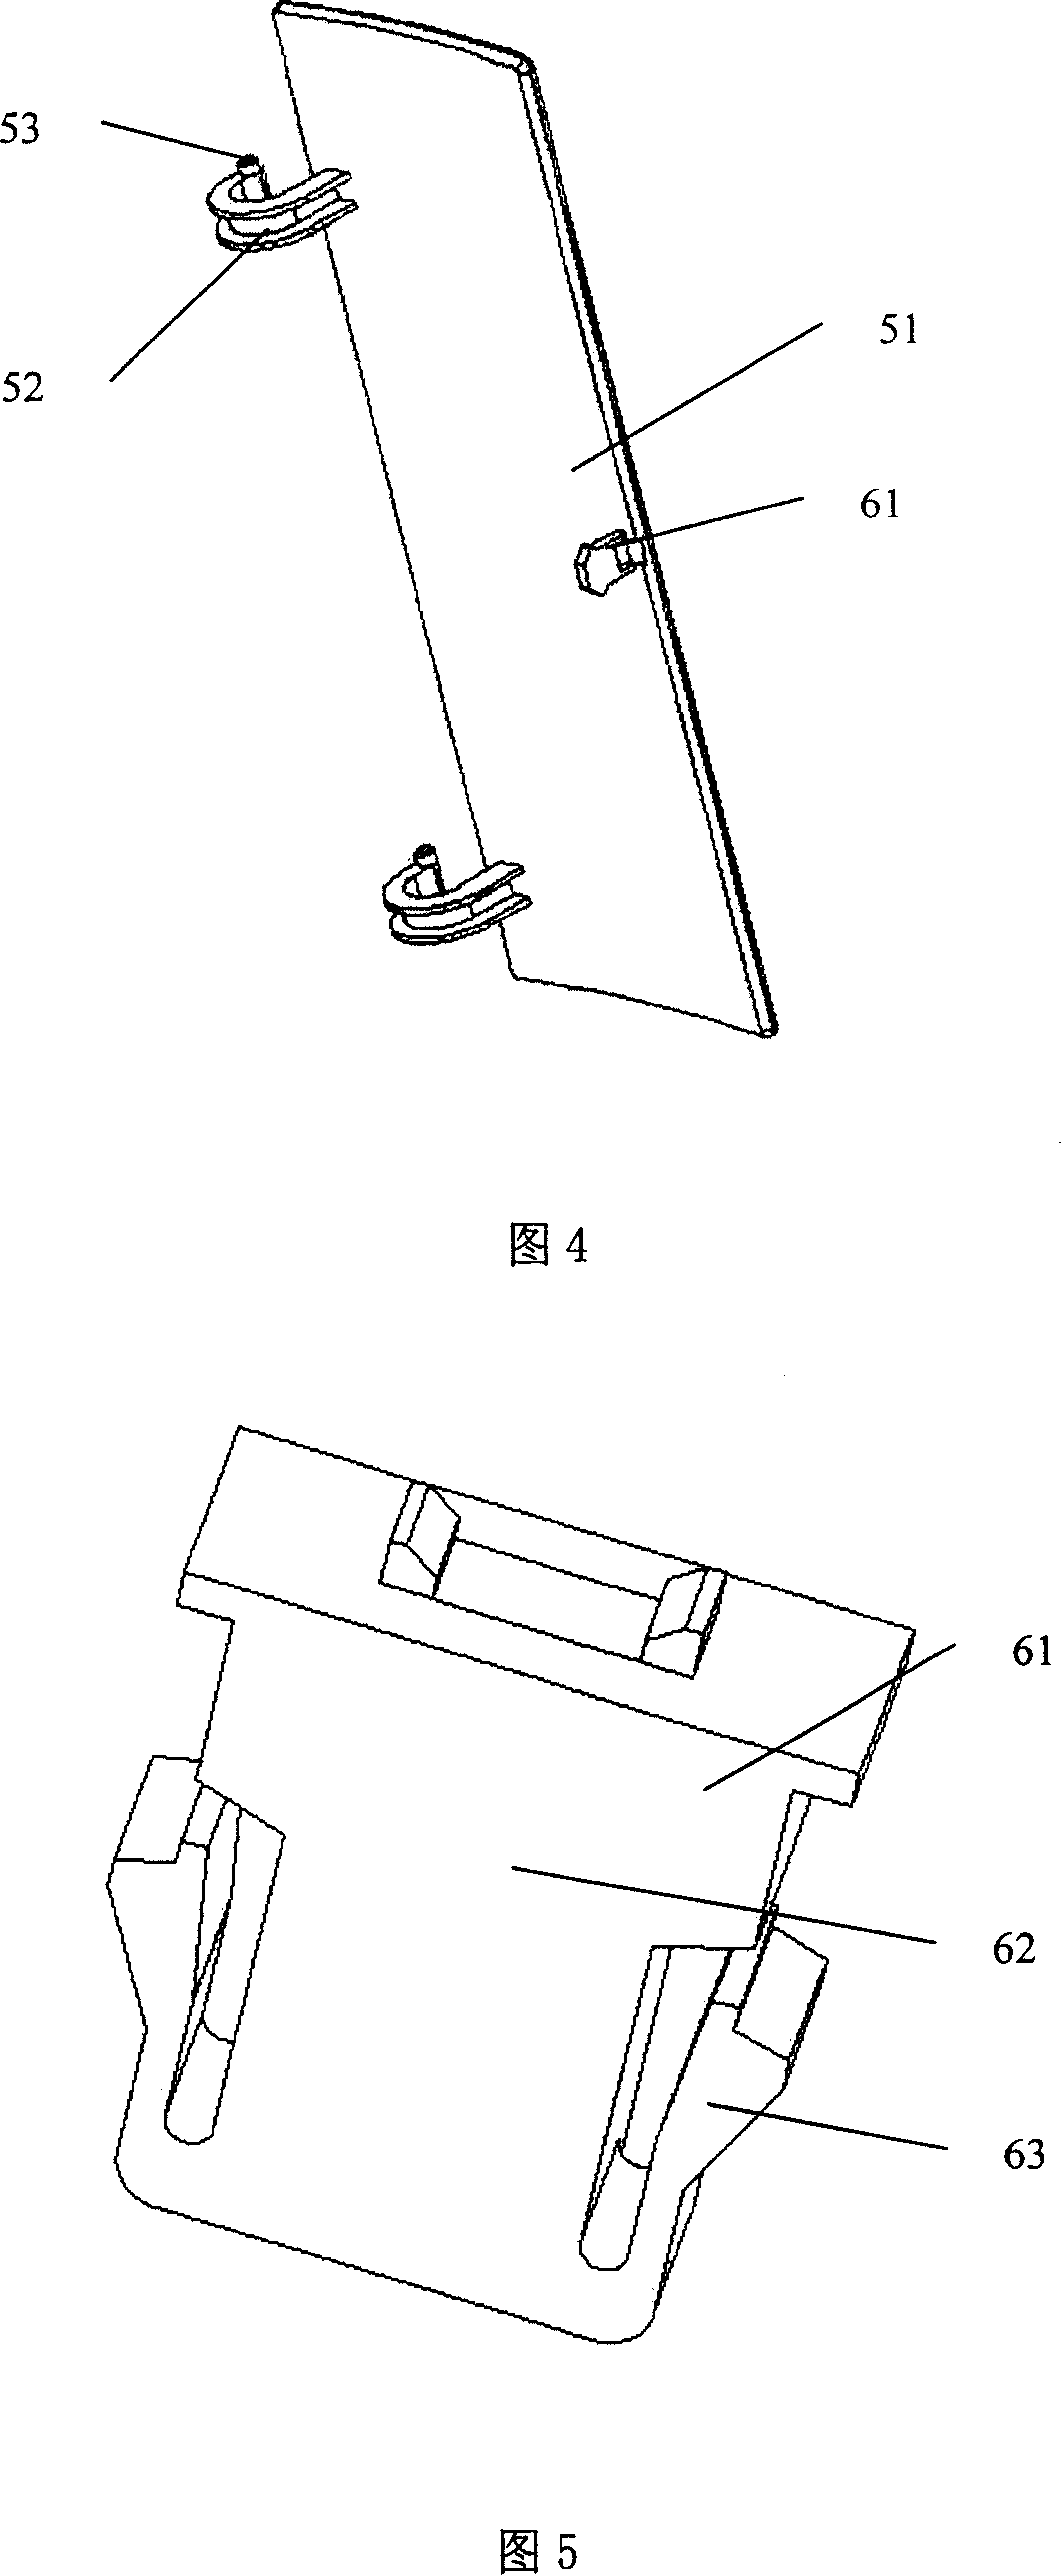 Safekeeping device for placing air conditioner telecontroller